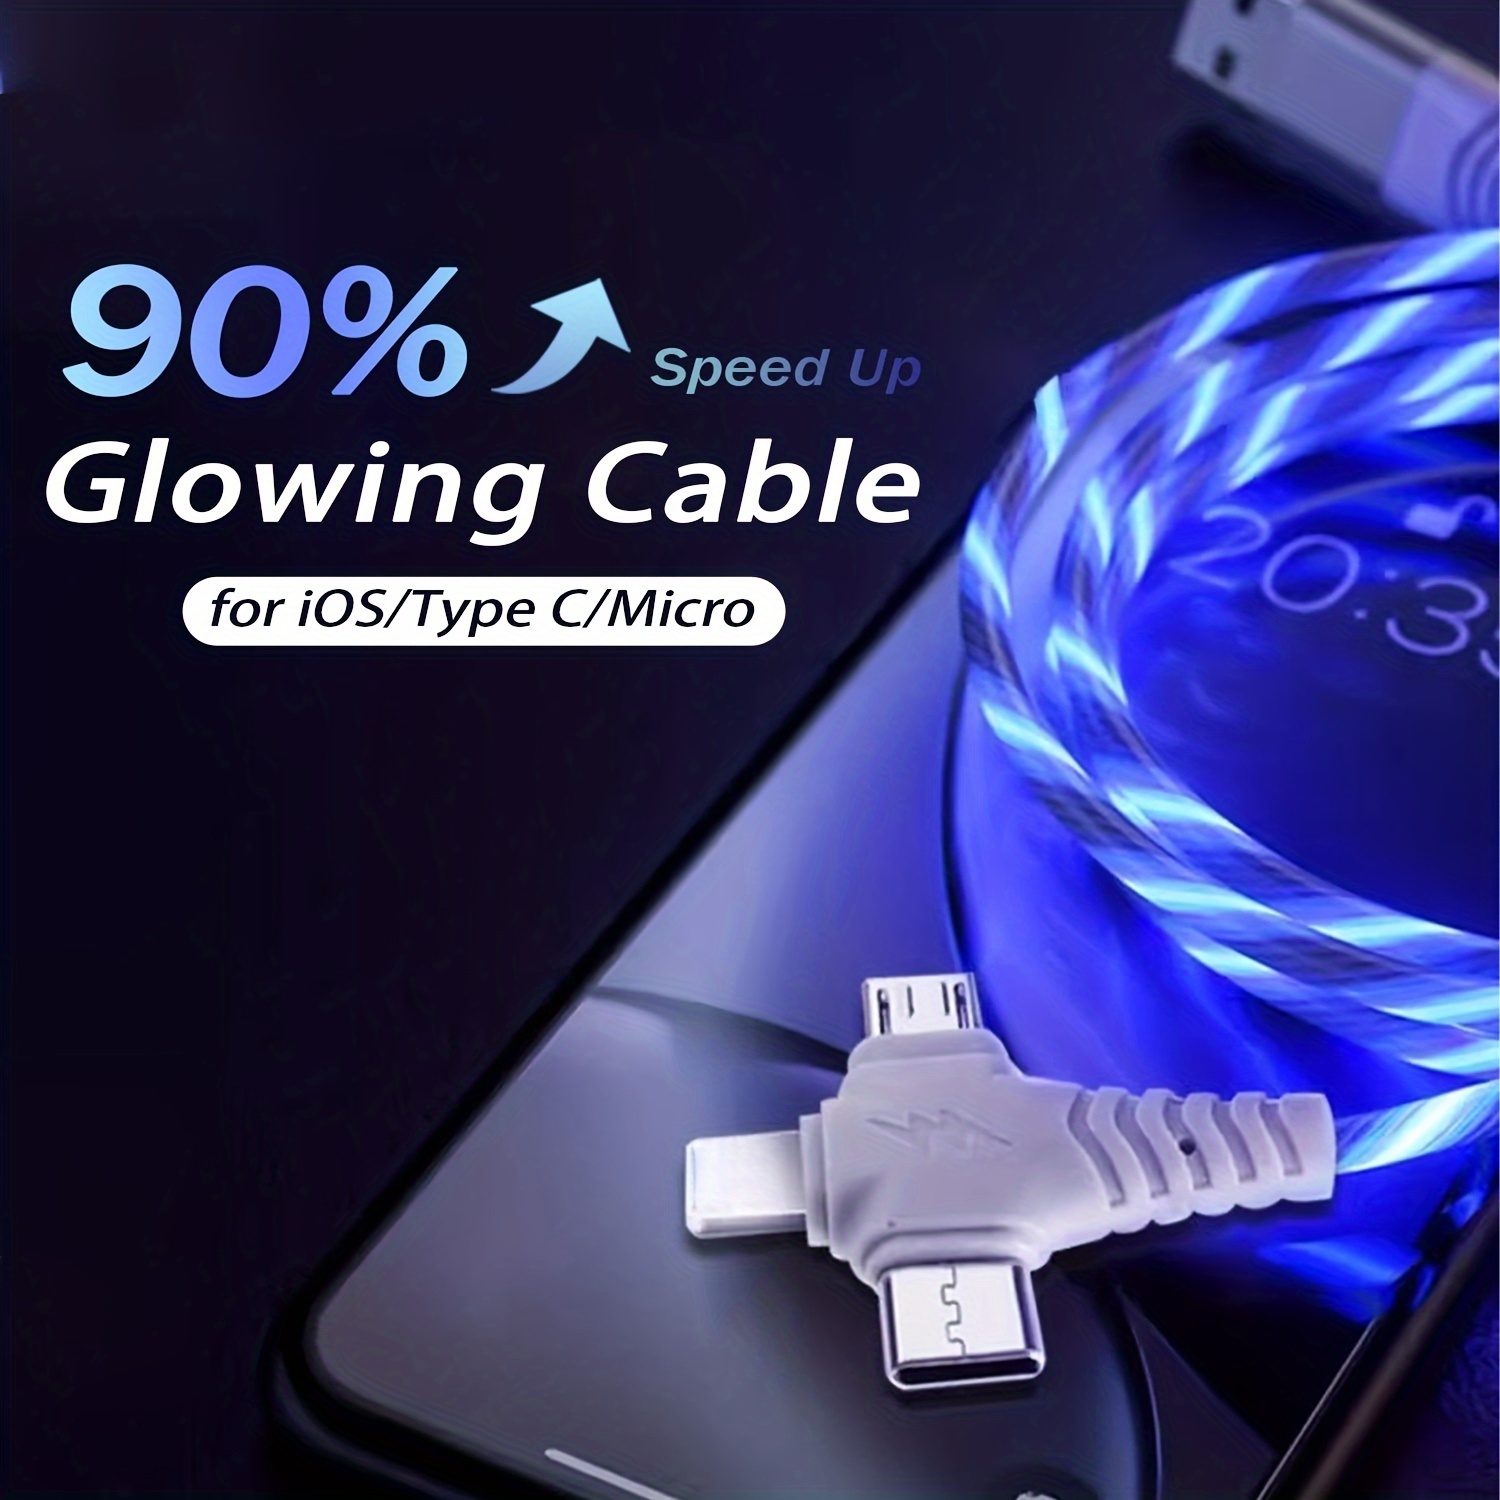 

3a Fast Charging Led Flowing Flat Cable 3 In 1 Multiple Usb To Male To Male Data Transfer Cord, 10-20w Power Output, Durable Abs Material, Compatible With Most Cell Phones